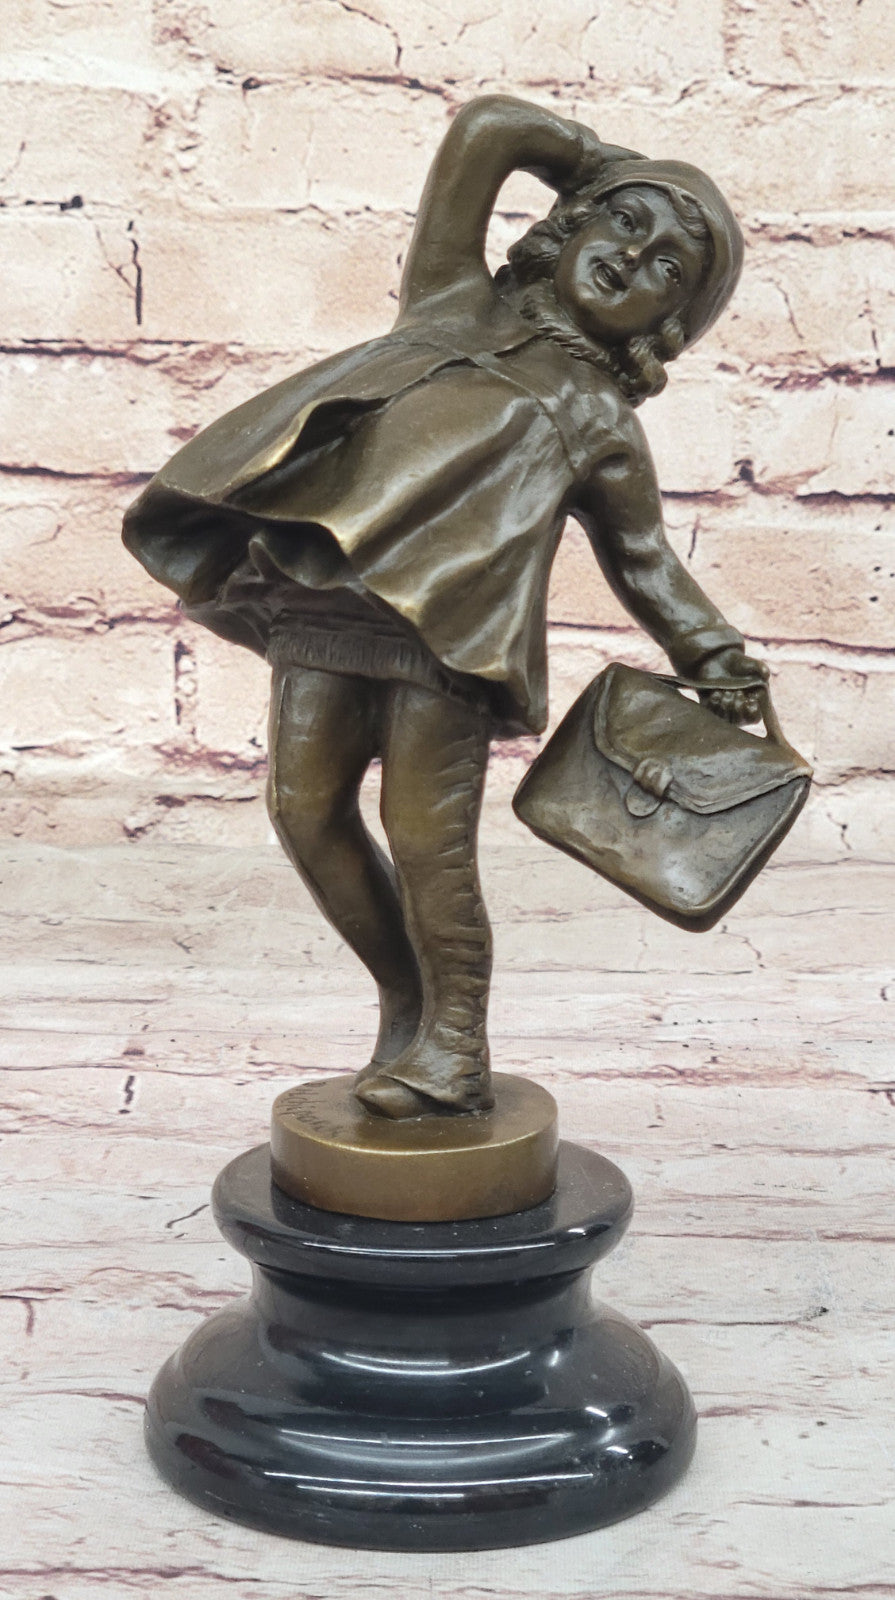 Signed Chiparus Bronze Sculpture: Girl Going to School Hot Cast Figurine